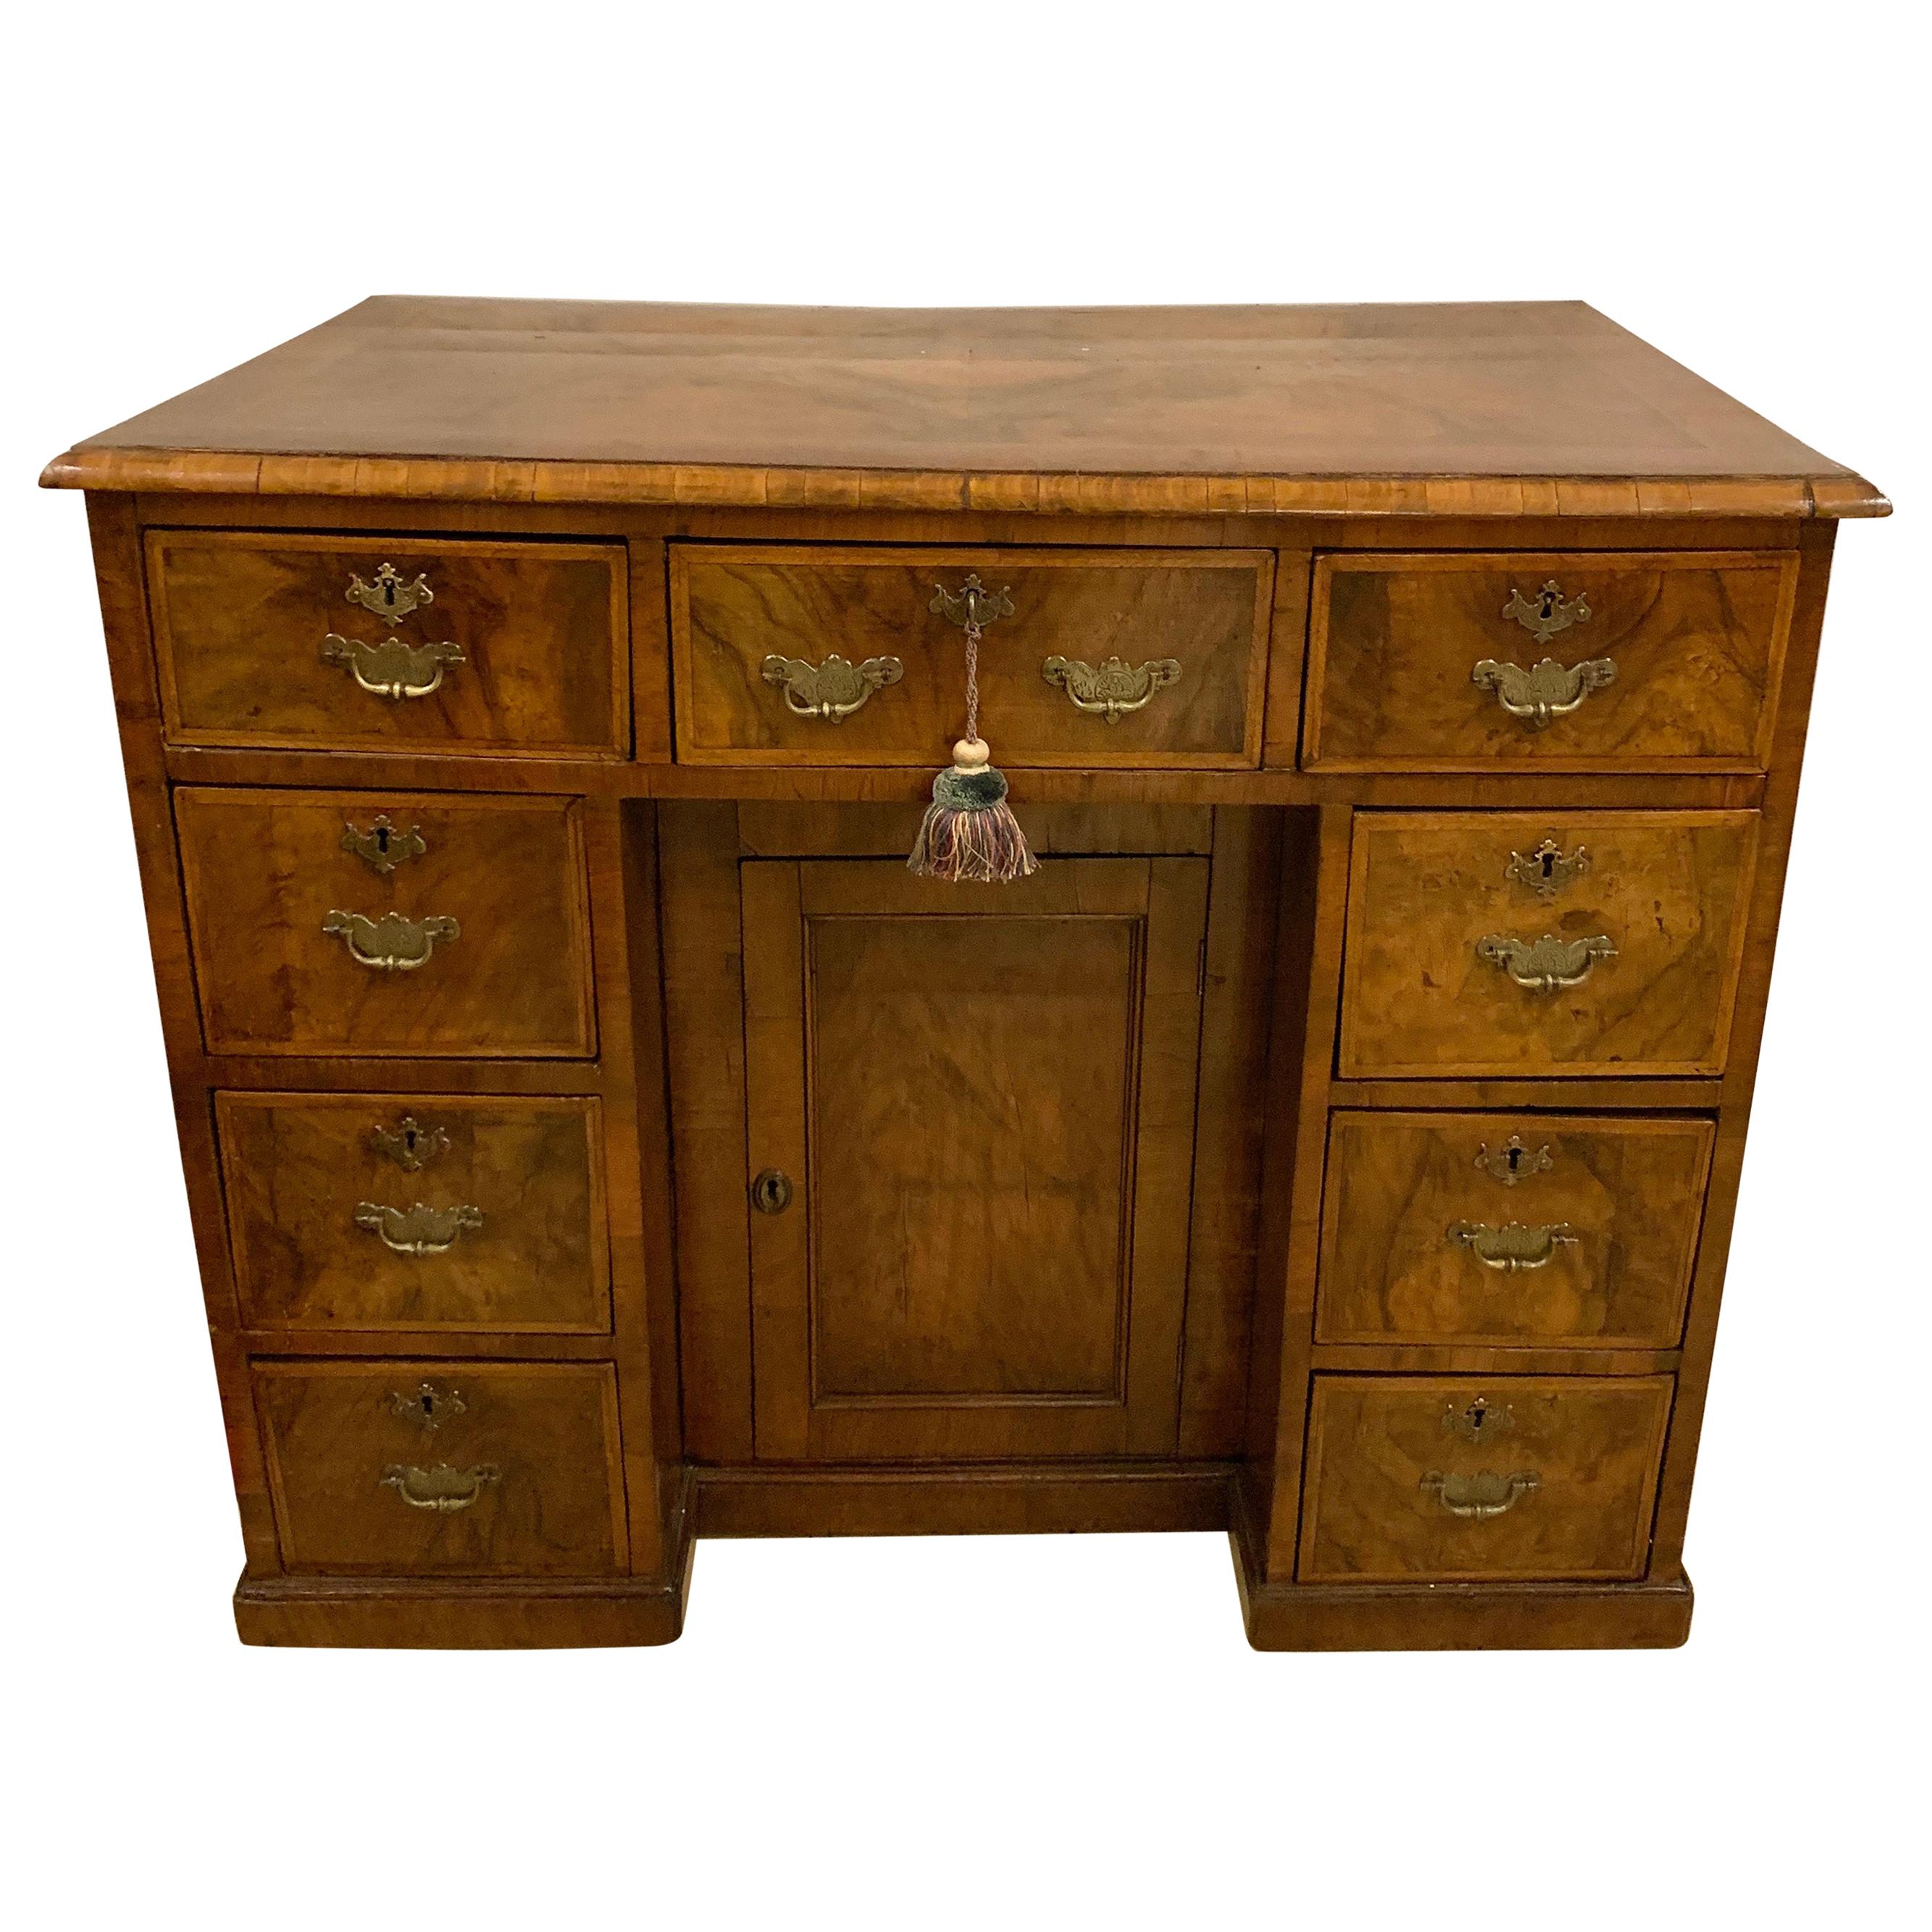 Early 18th-19th Century George III Knee Hole Desk Writing Table